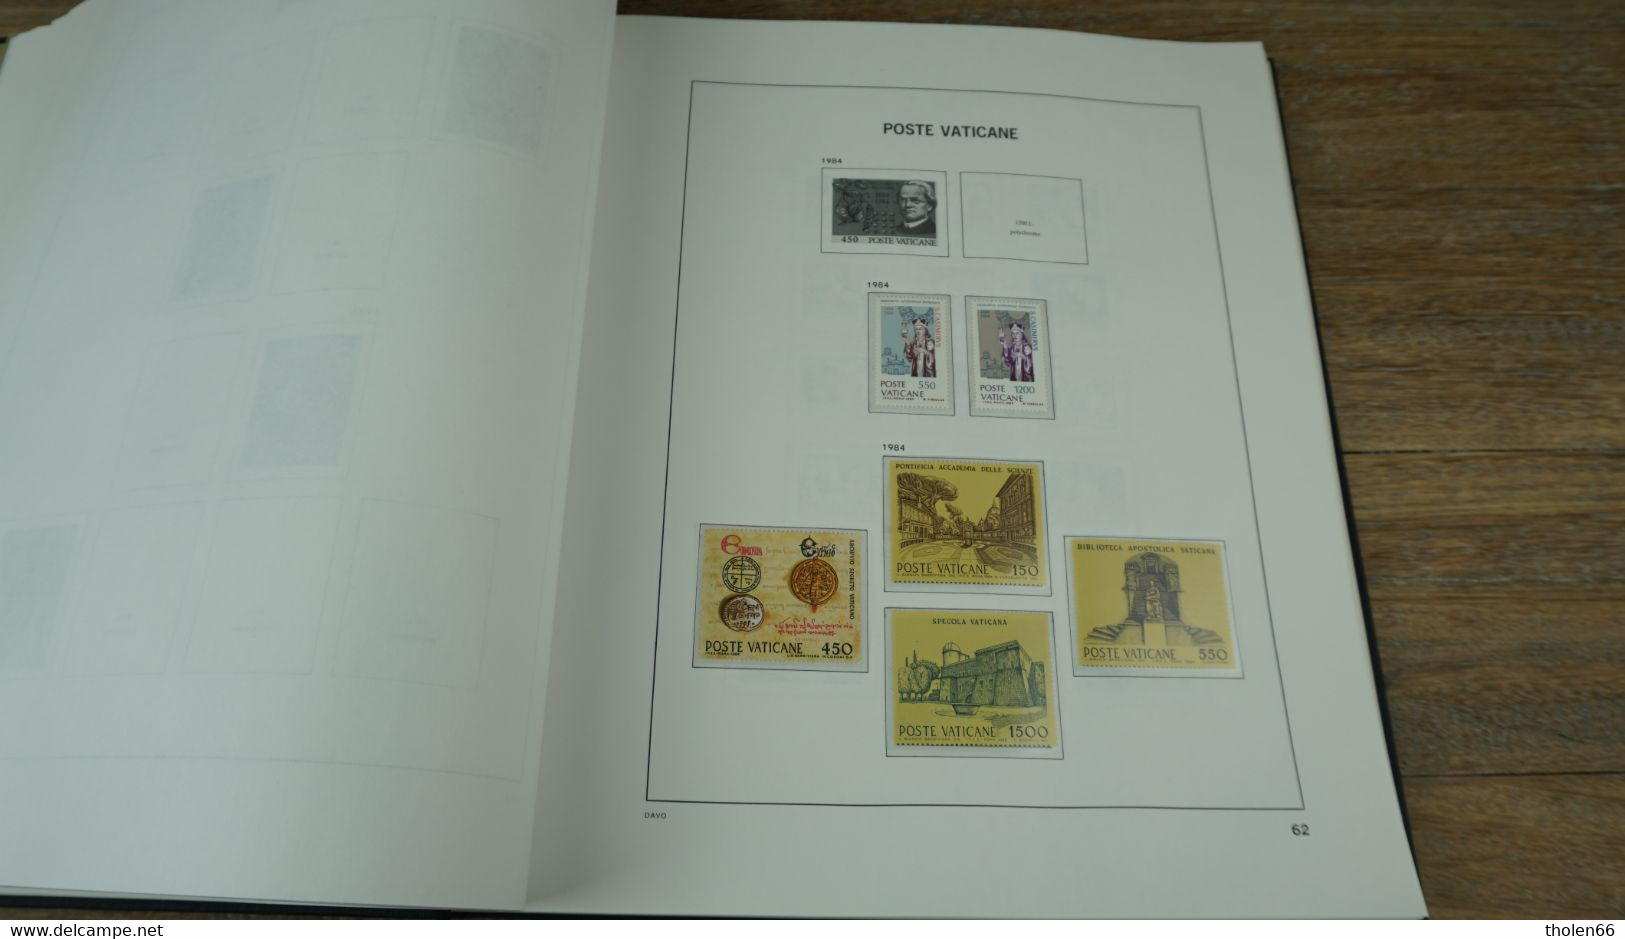 Vatican Poste - Album DAVO  1852 - 2001 - Nice collection (incomplete) ** mint never hinged.